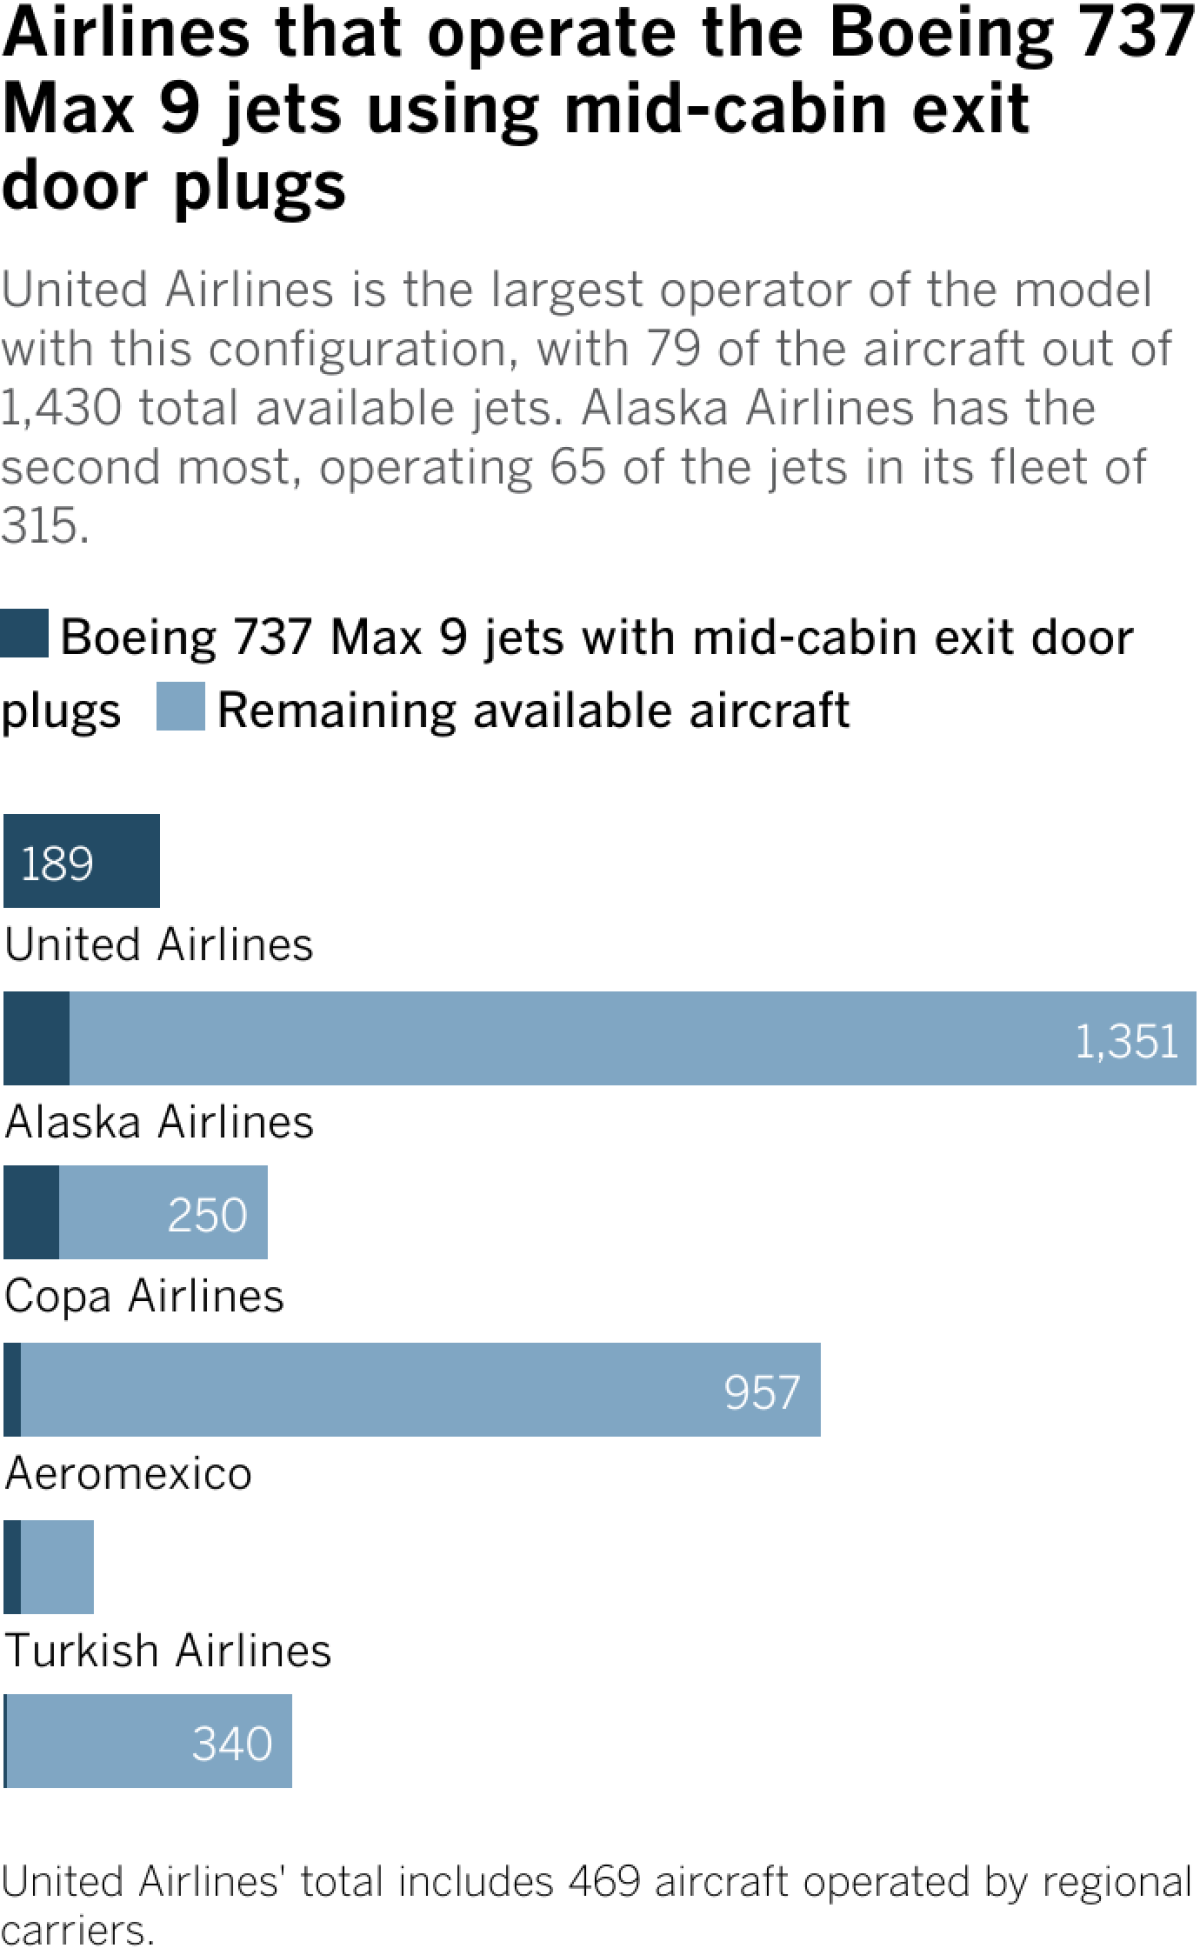 United Airlines is the largest operator of the model with this configuration, with 79 of the aircraft out of 1,430 total available jets. Alaska Airlines has the second most, operating 65 of the jets in its fleet of 315.